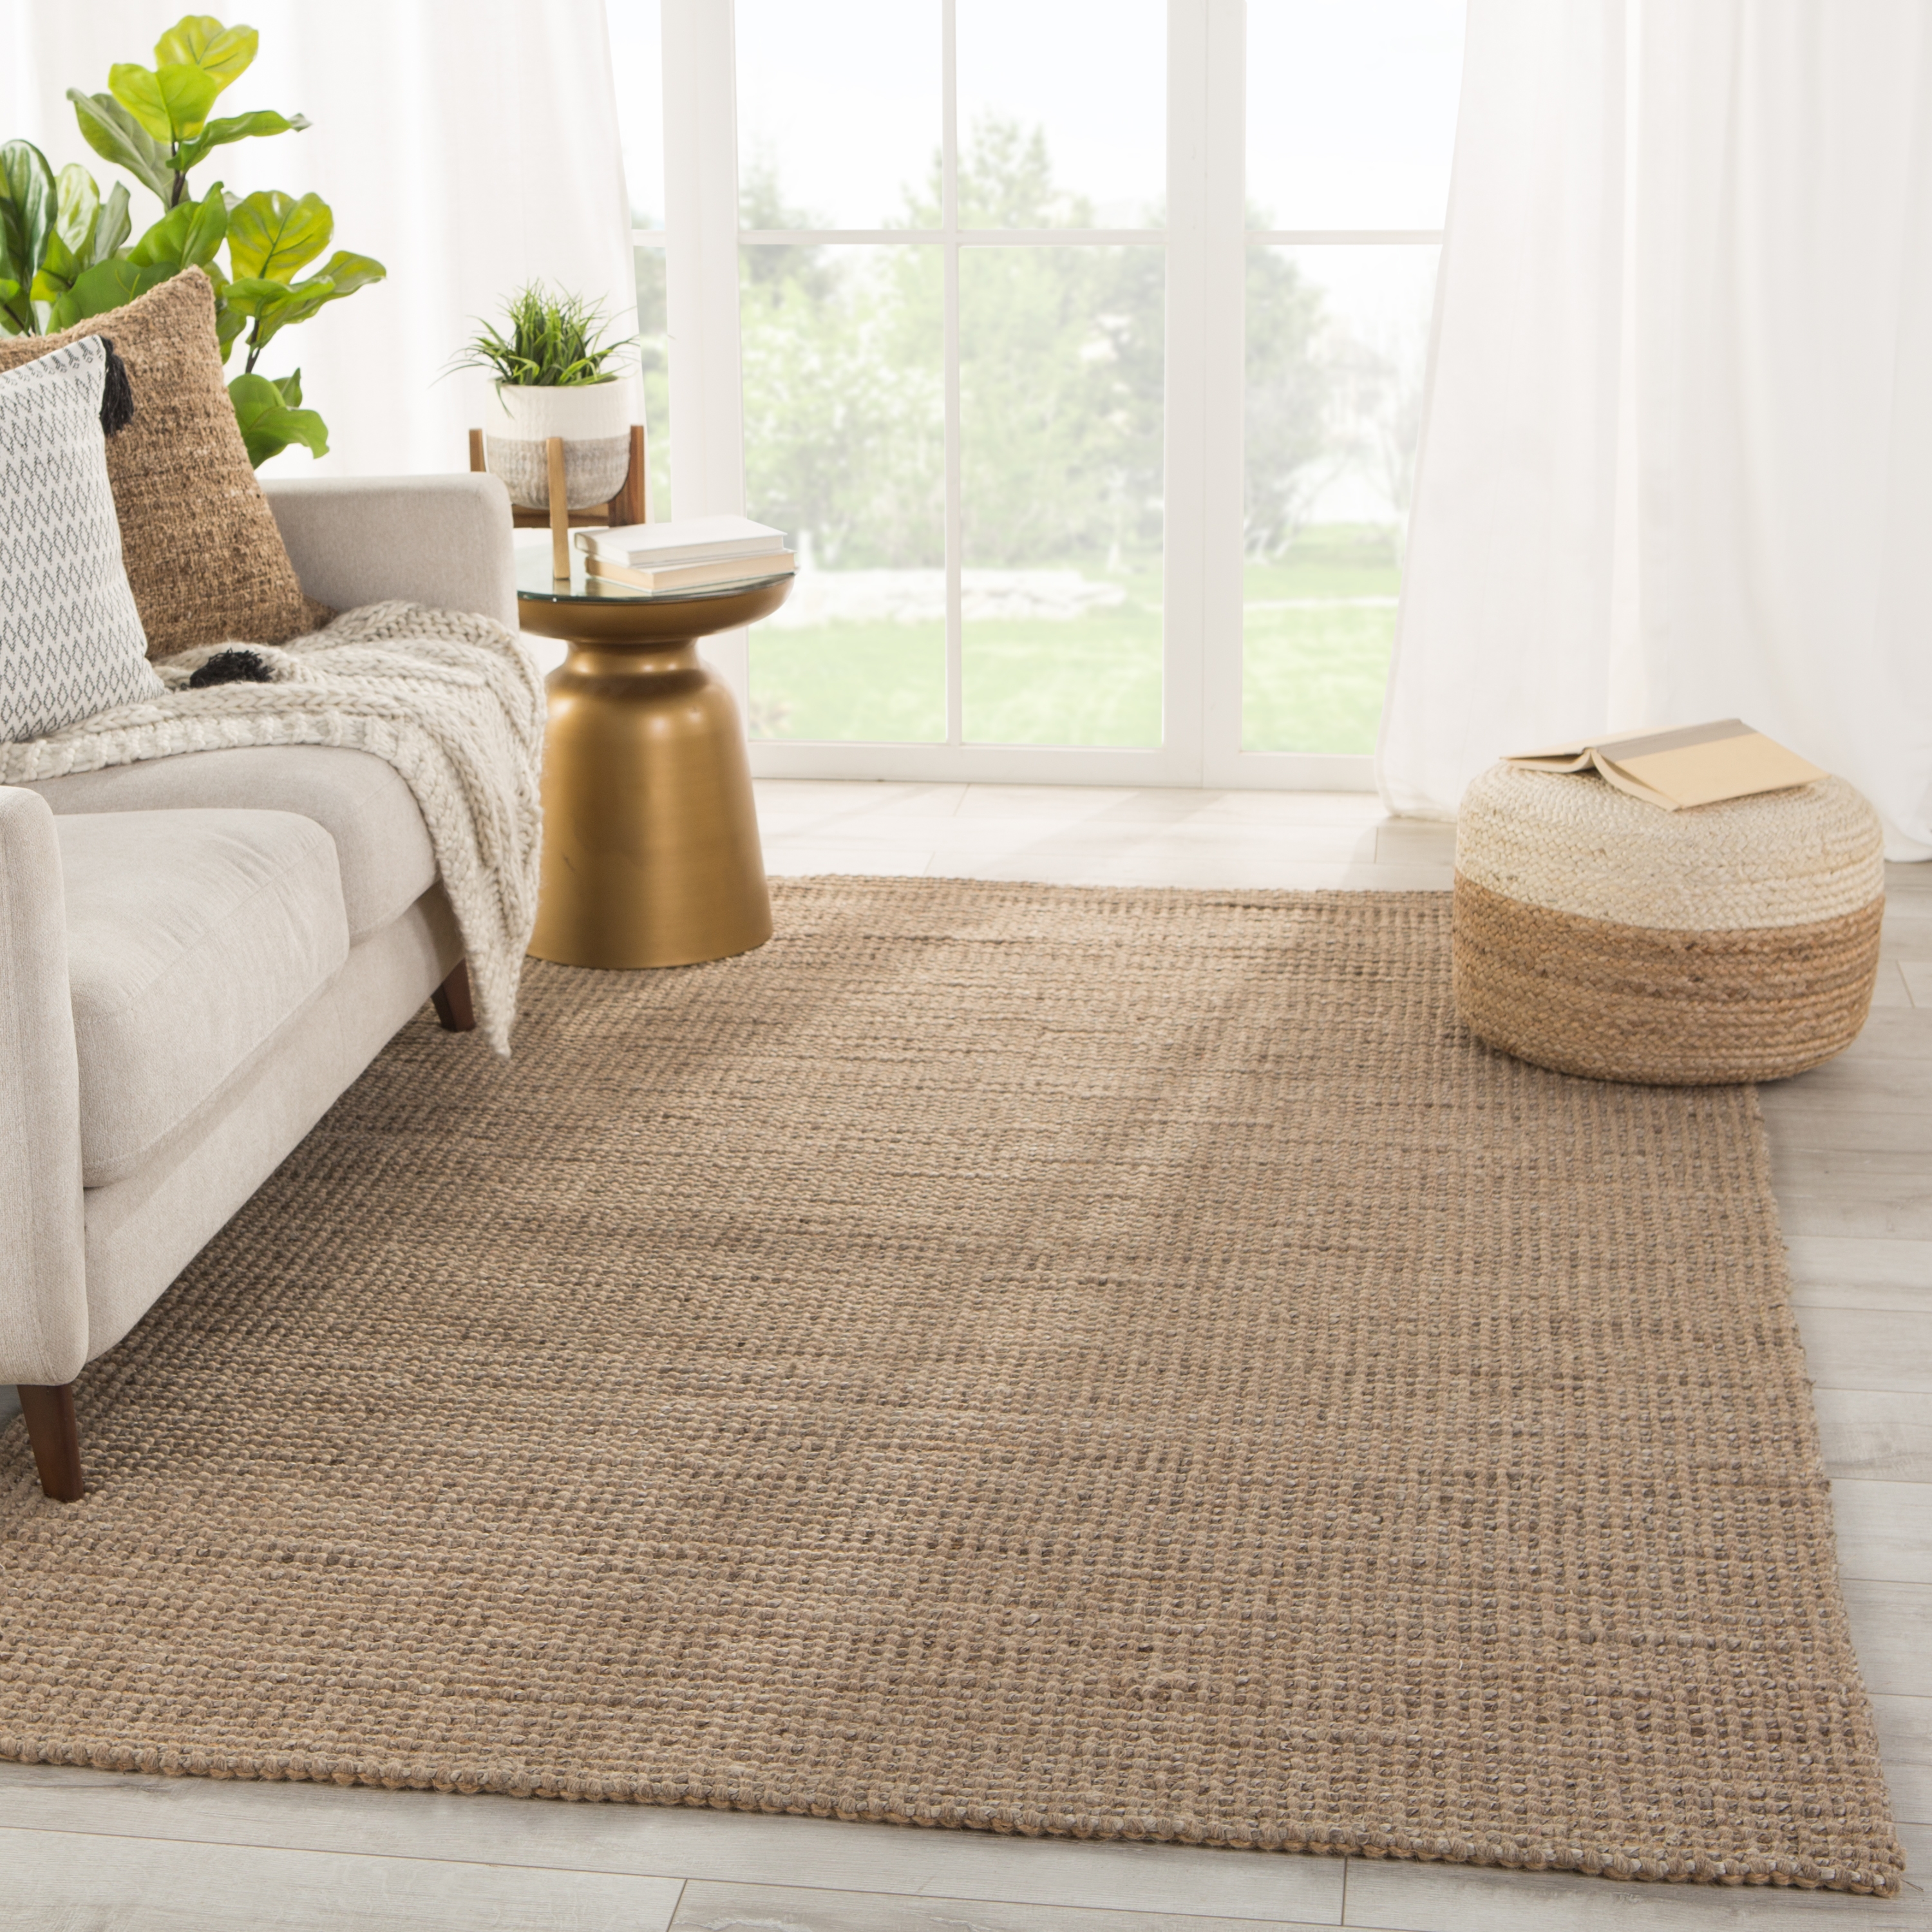 Beech Natural Solid Tan/ Taupe Area Rug (5'X8') - Image 4